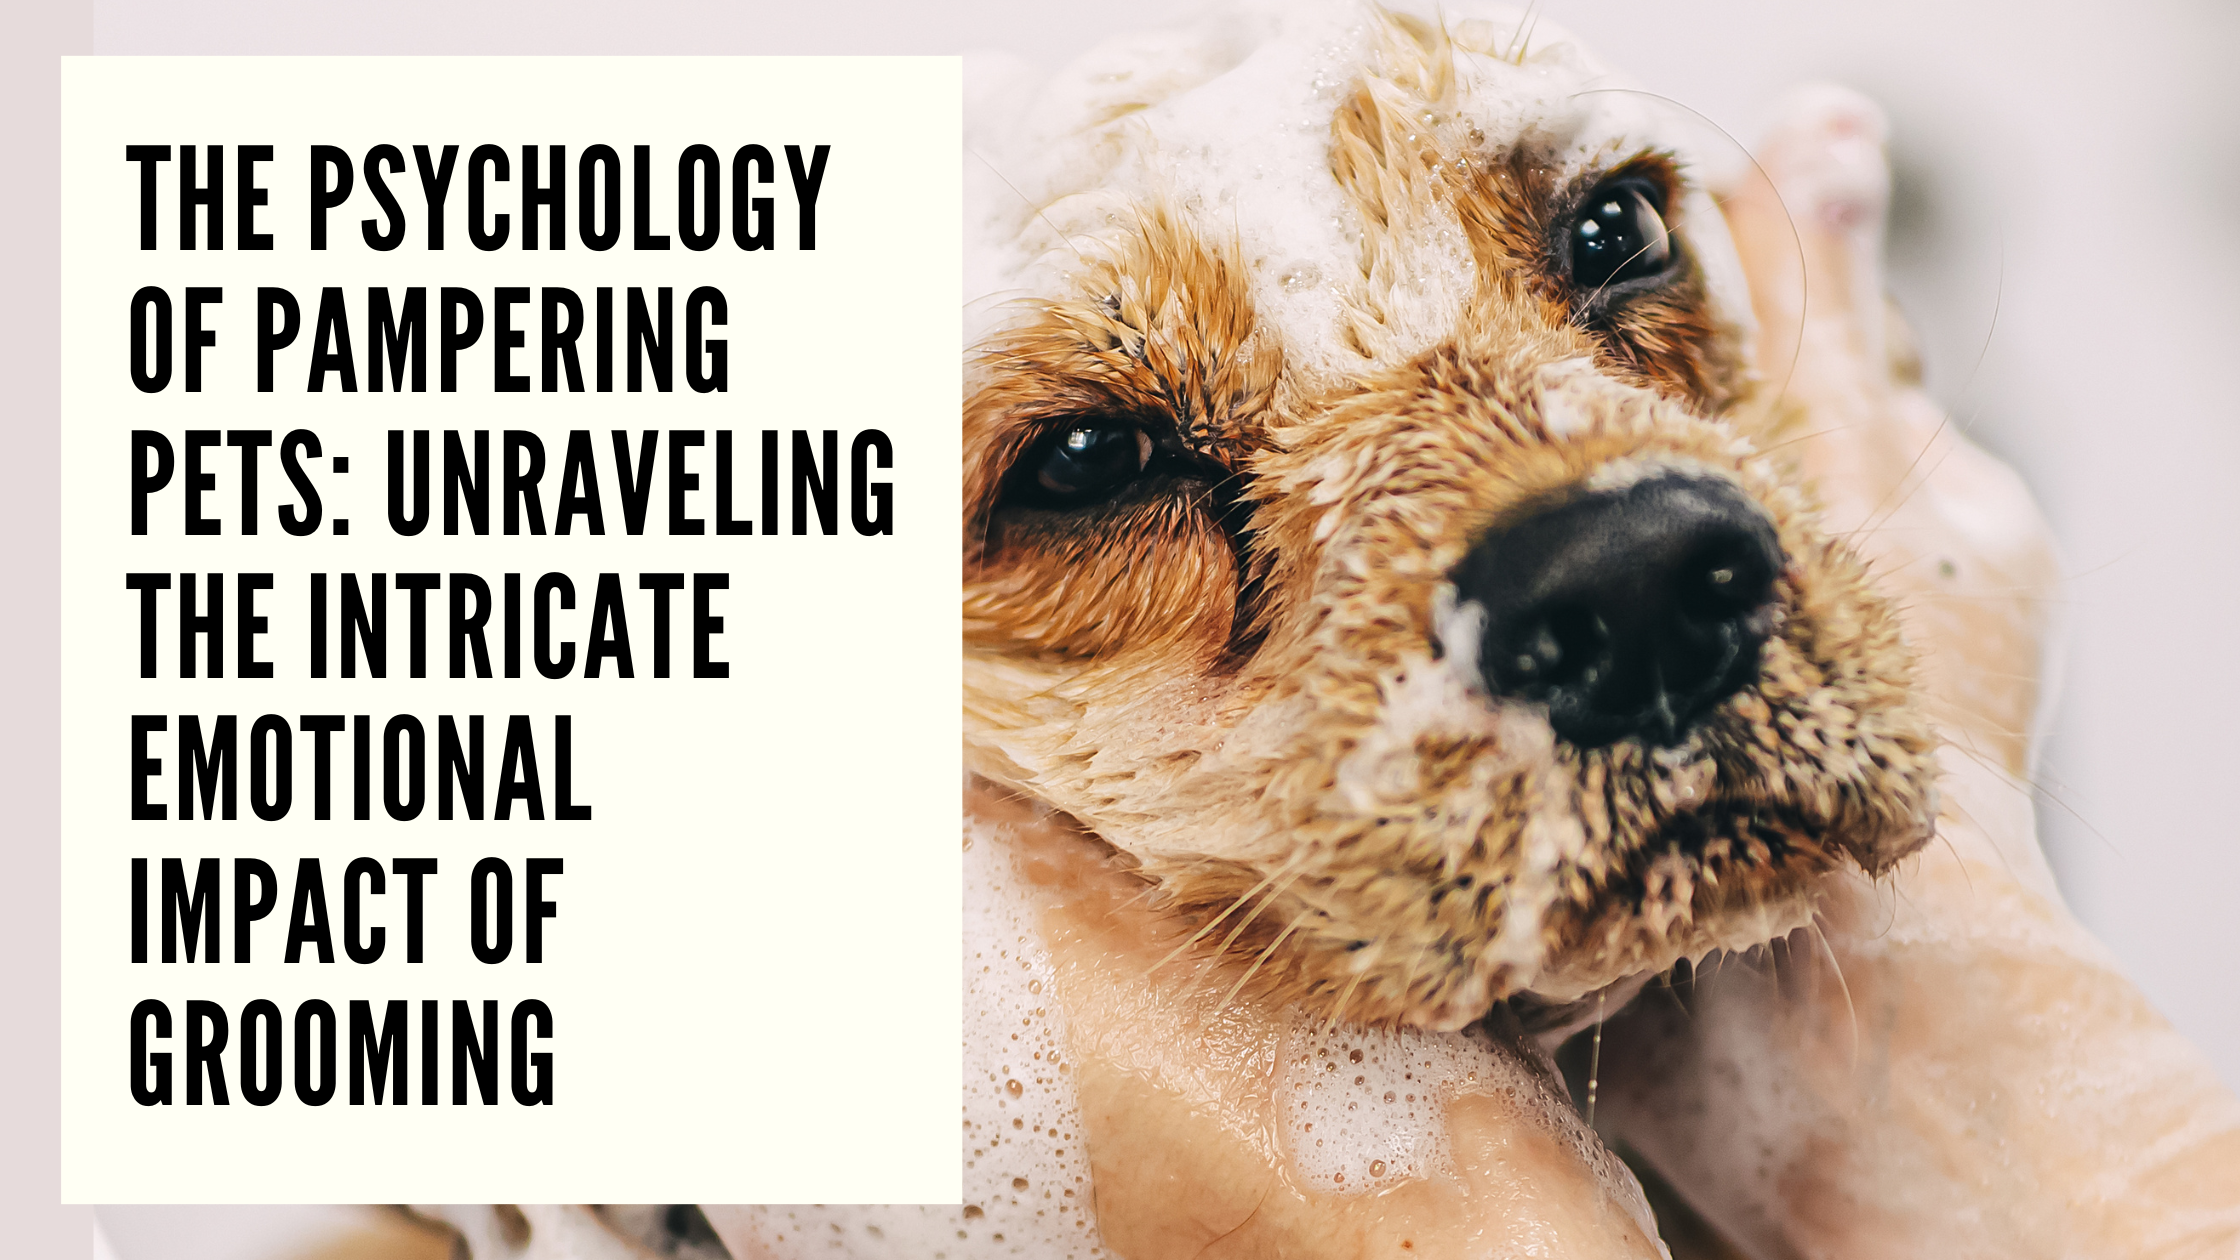 The Psychology of Pampering Pets Unraveling the Intricate Emotional Impact of Grooming